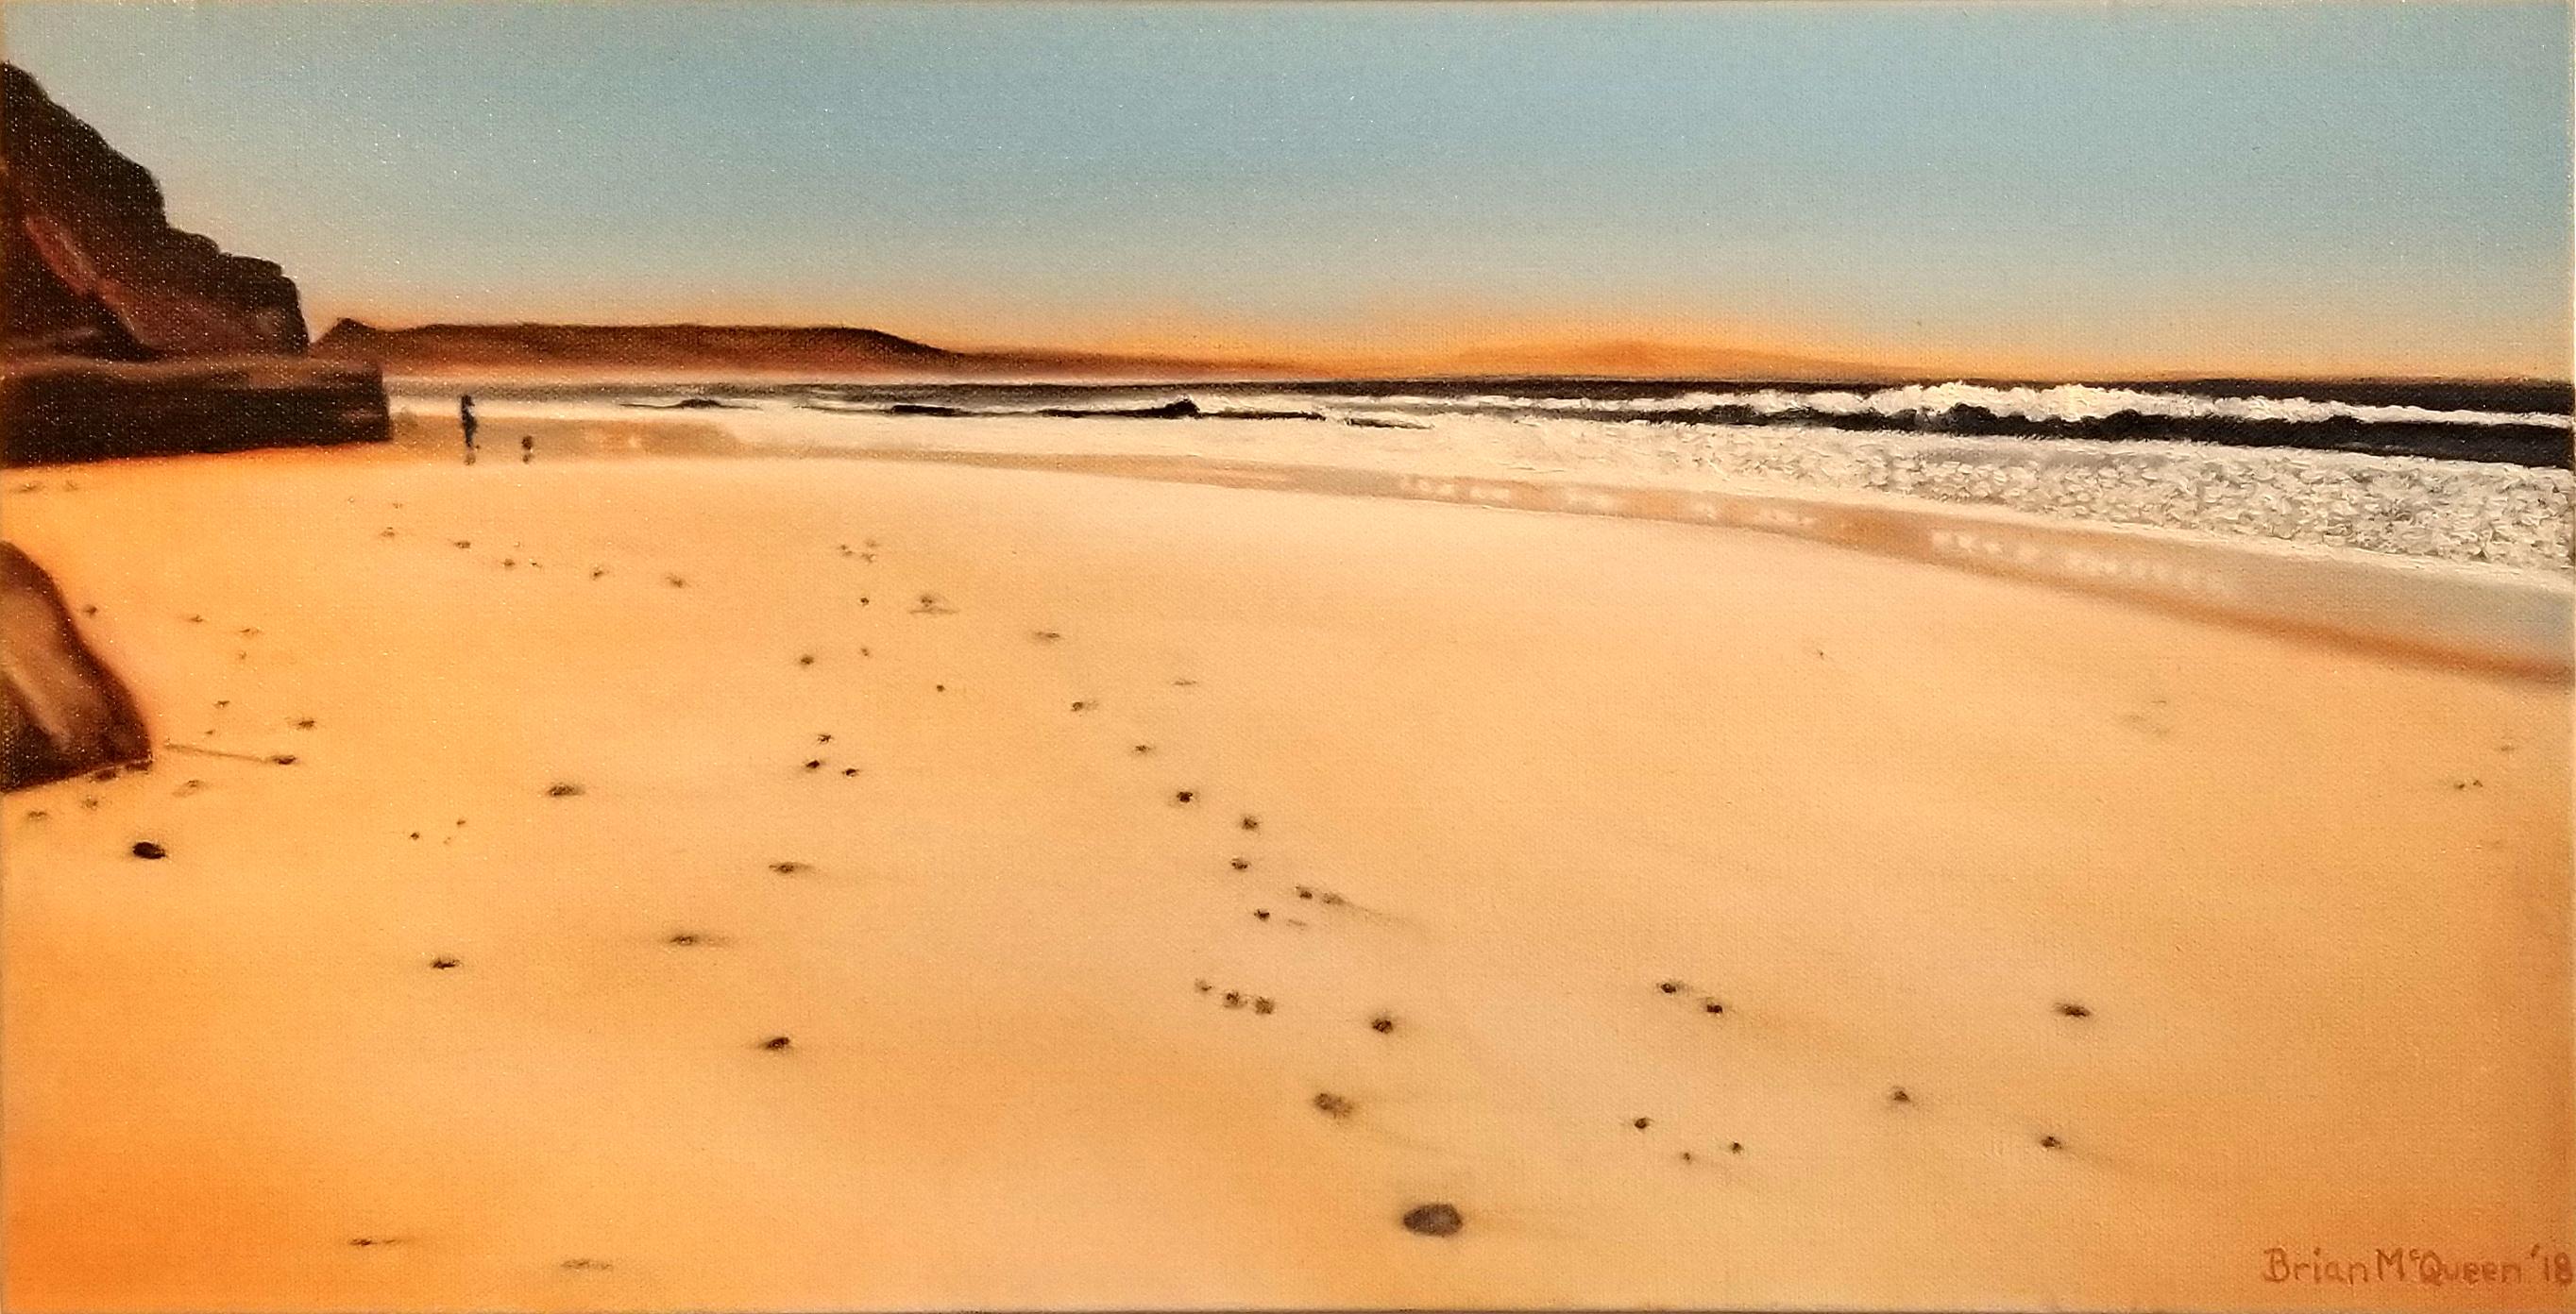 Brian McQueen Landscape Painting - Early Morning Walk